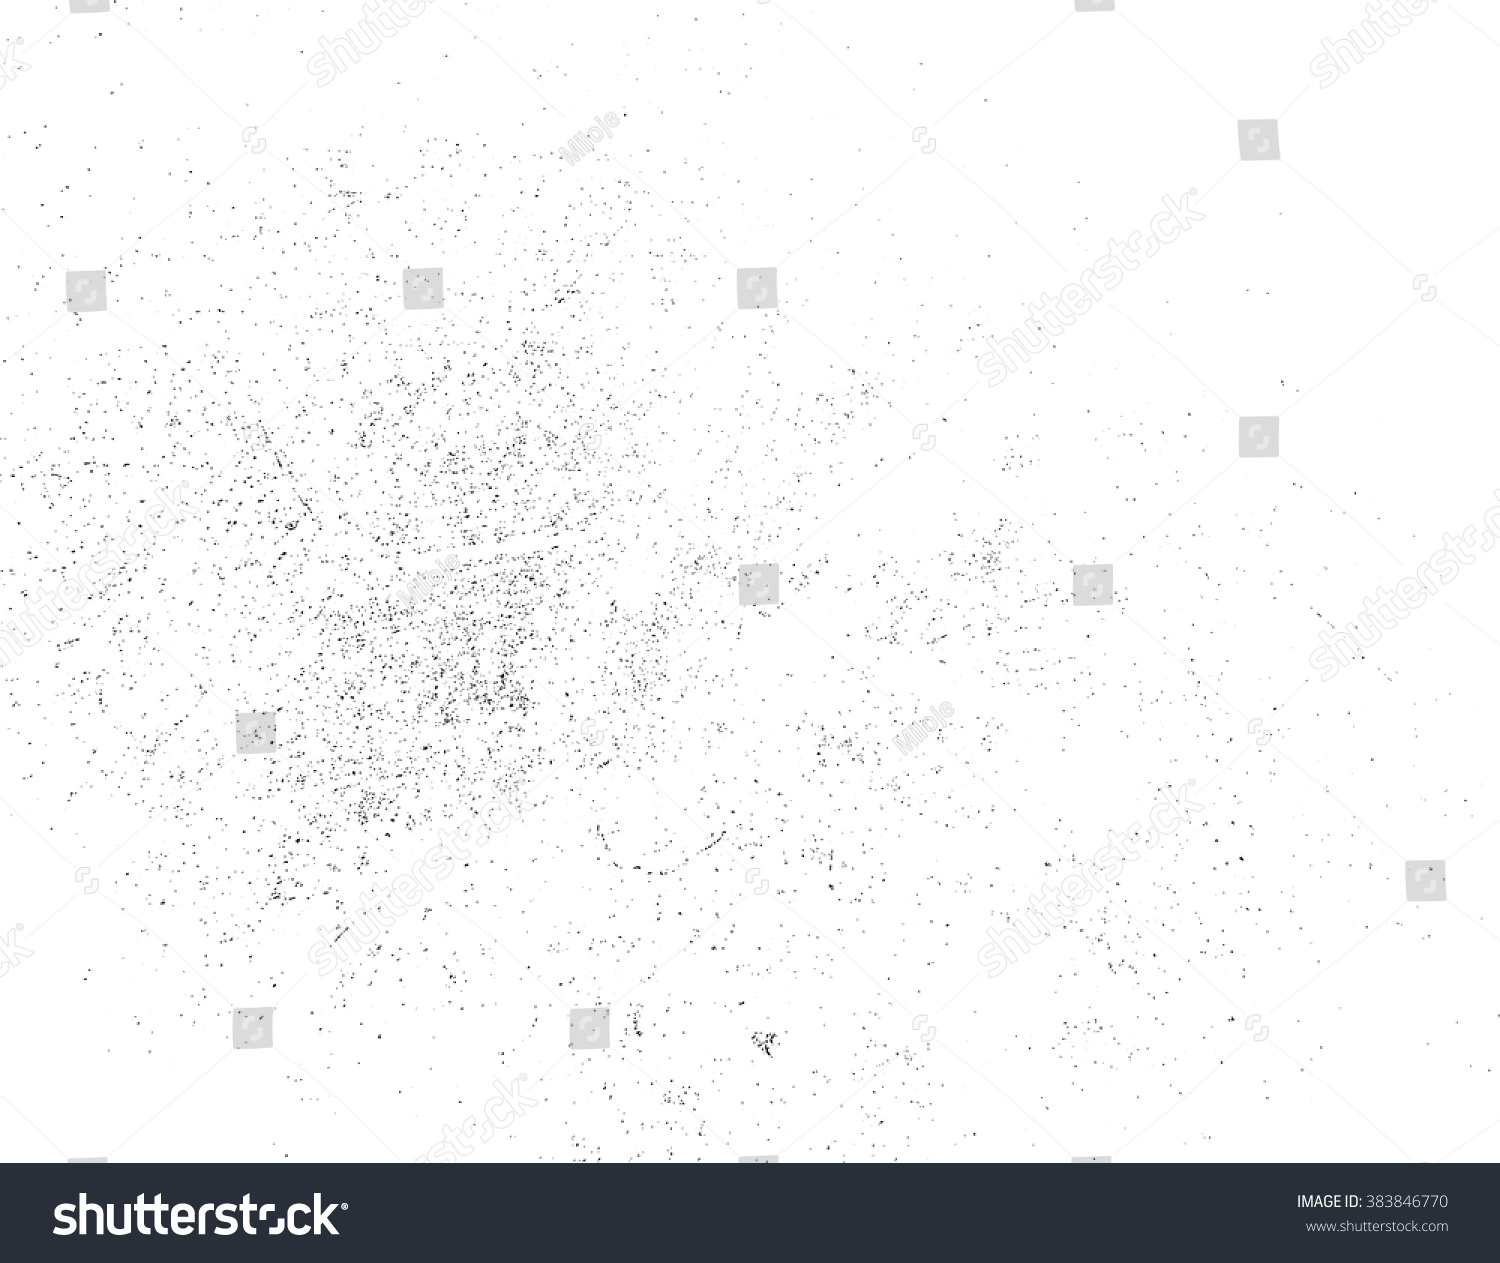 Grunge Urban Background.Texture Vector.Dust Overlay Distress Grain ,Simply Place illustration over any Object to Create grungy Effect .abstract,splattered , dirty,poster for your design.  #383846770